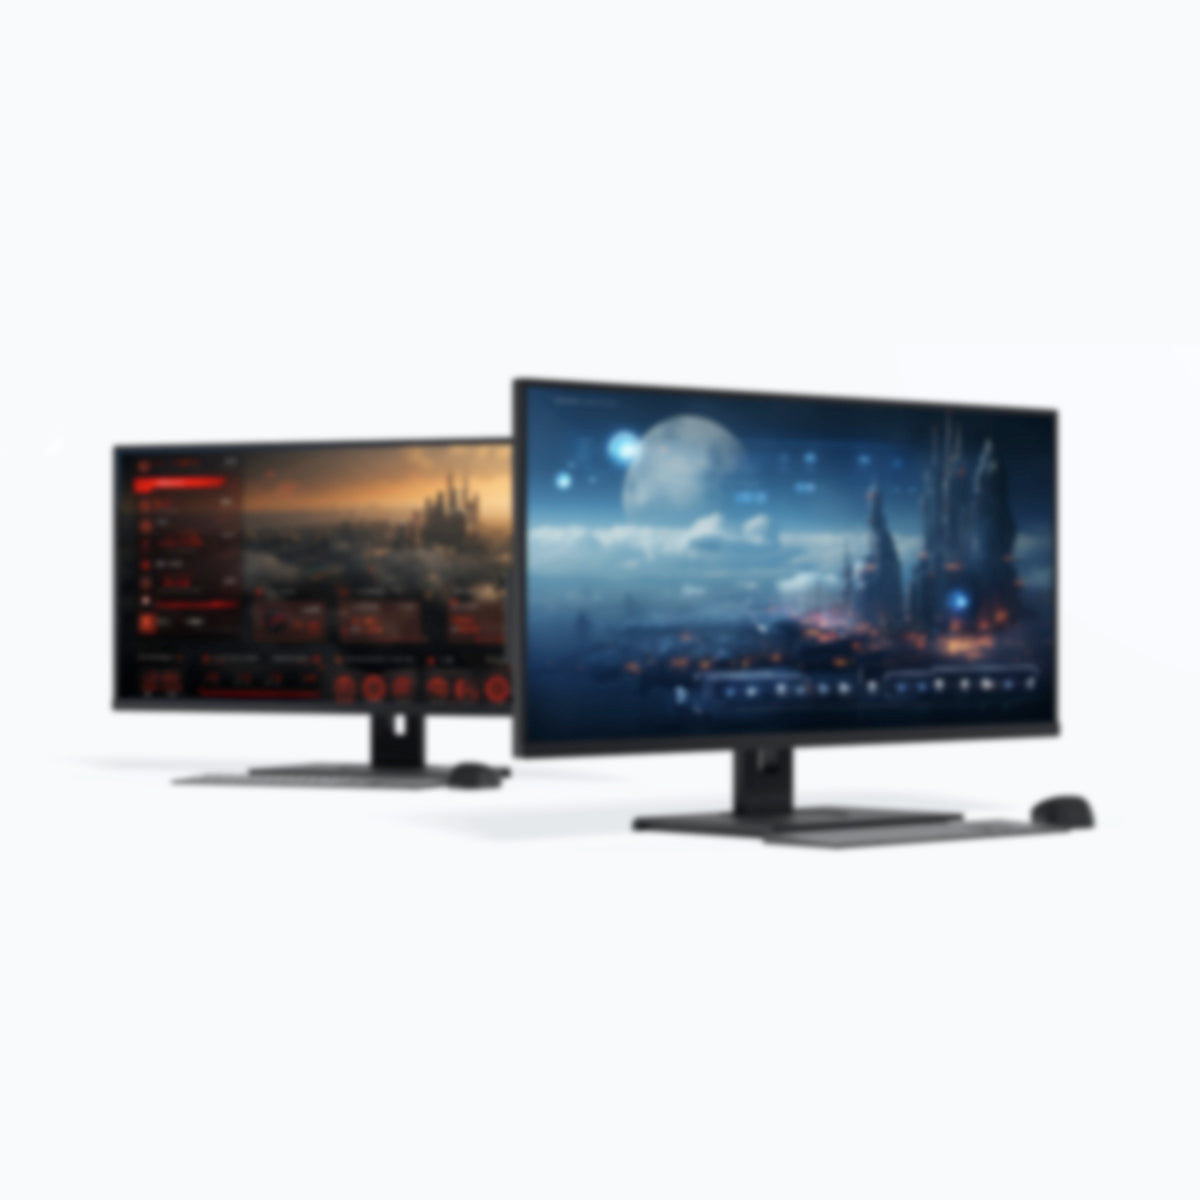 2 monitors will be launched soon